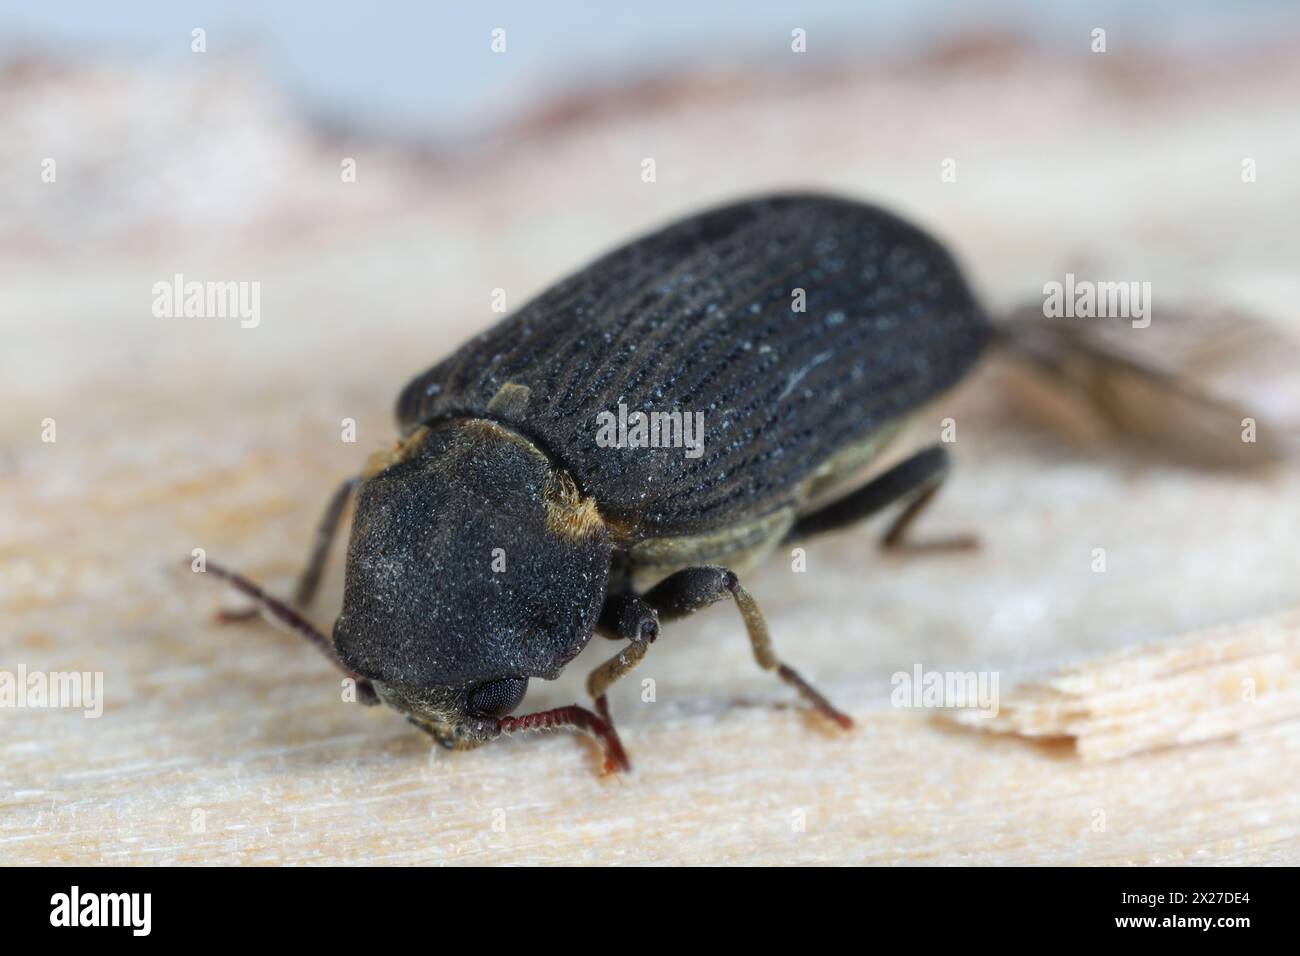 Hadrobregmus pertinax is a species of woodboring beetle from family Anobiidae. Beetle on wood. Stock Photo